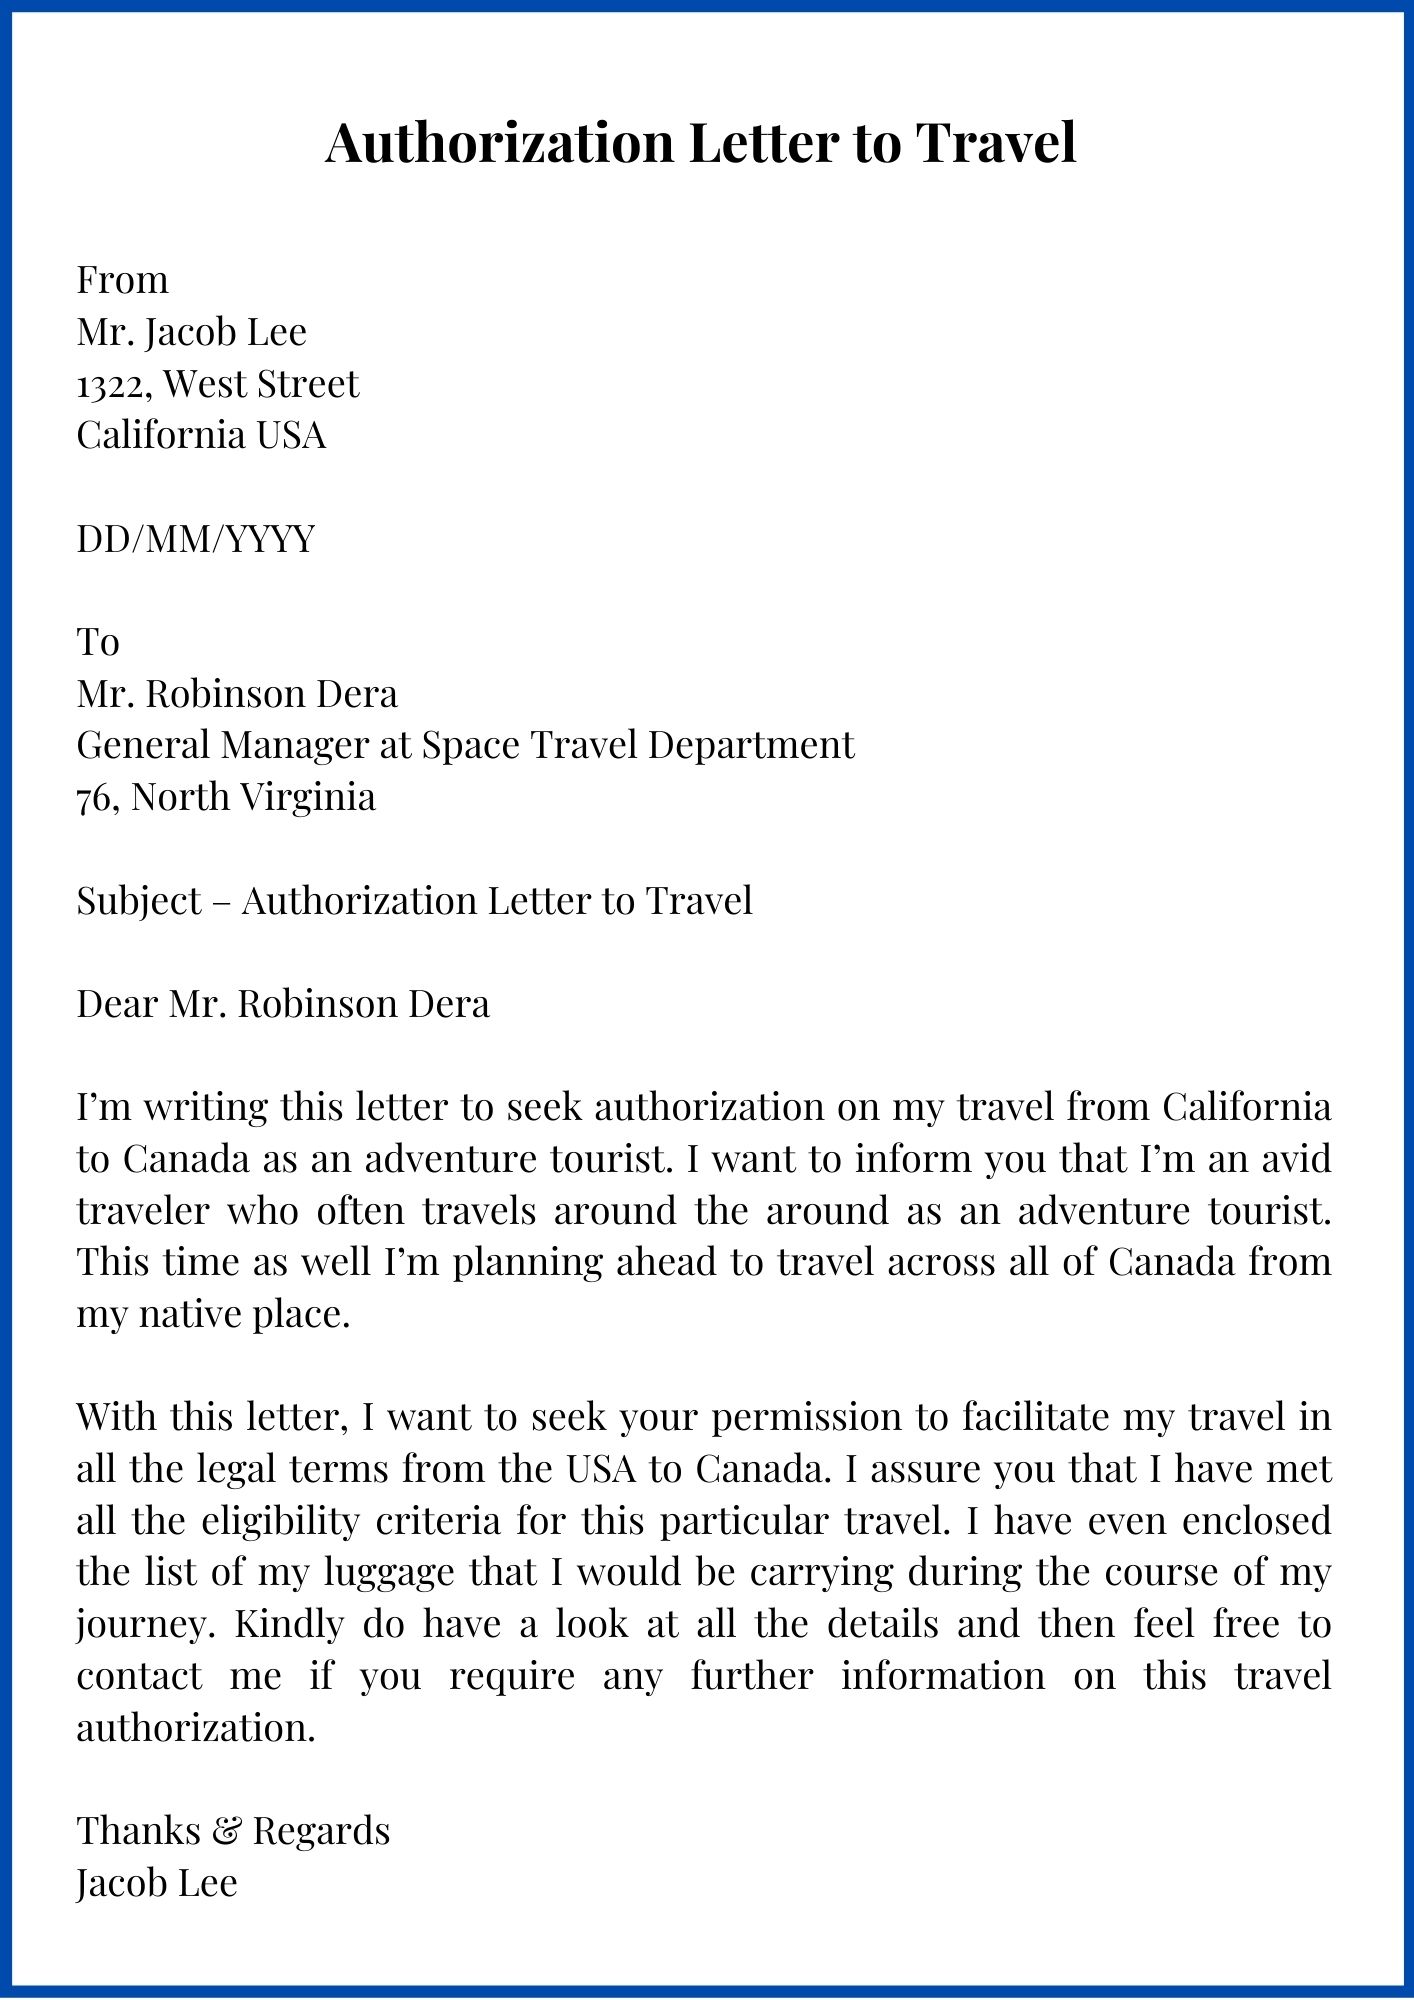 letter about travelling